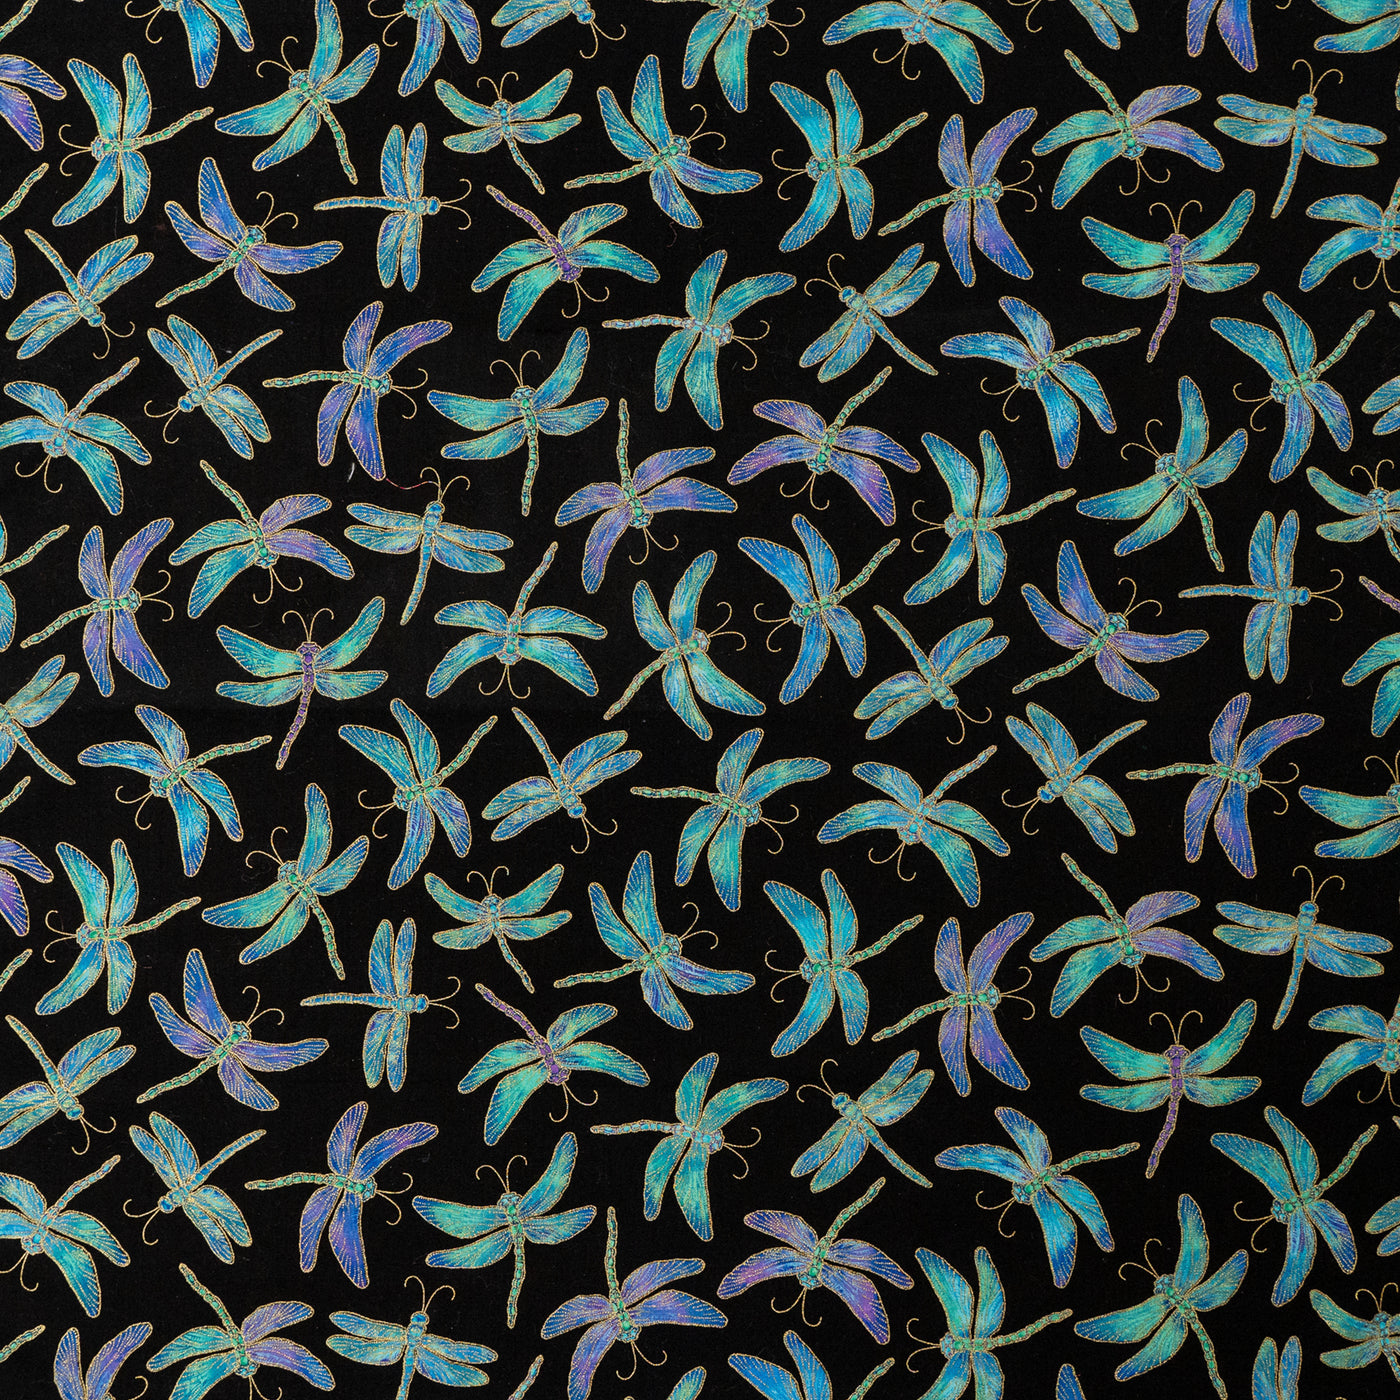 Beautiful 100% cotton fabric with a dragonfly design.  In shades of blues, greens & purples